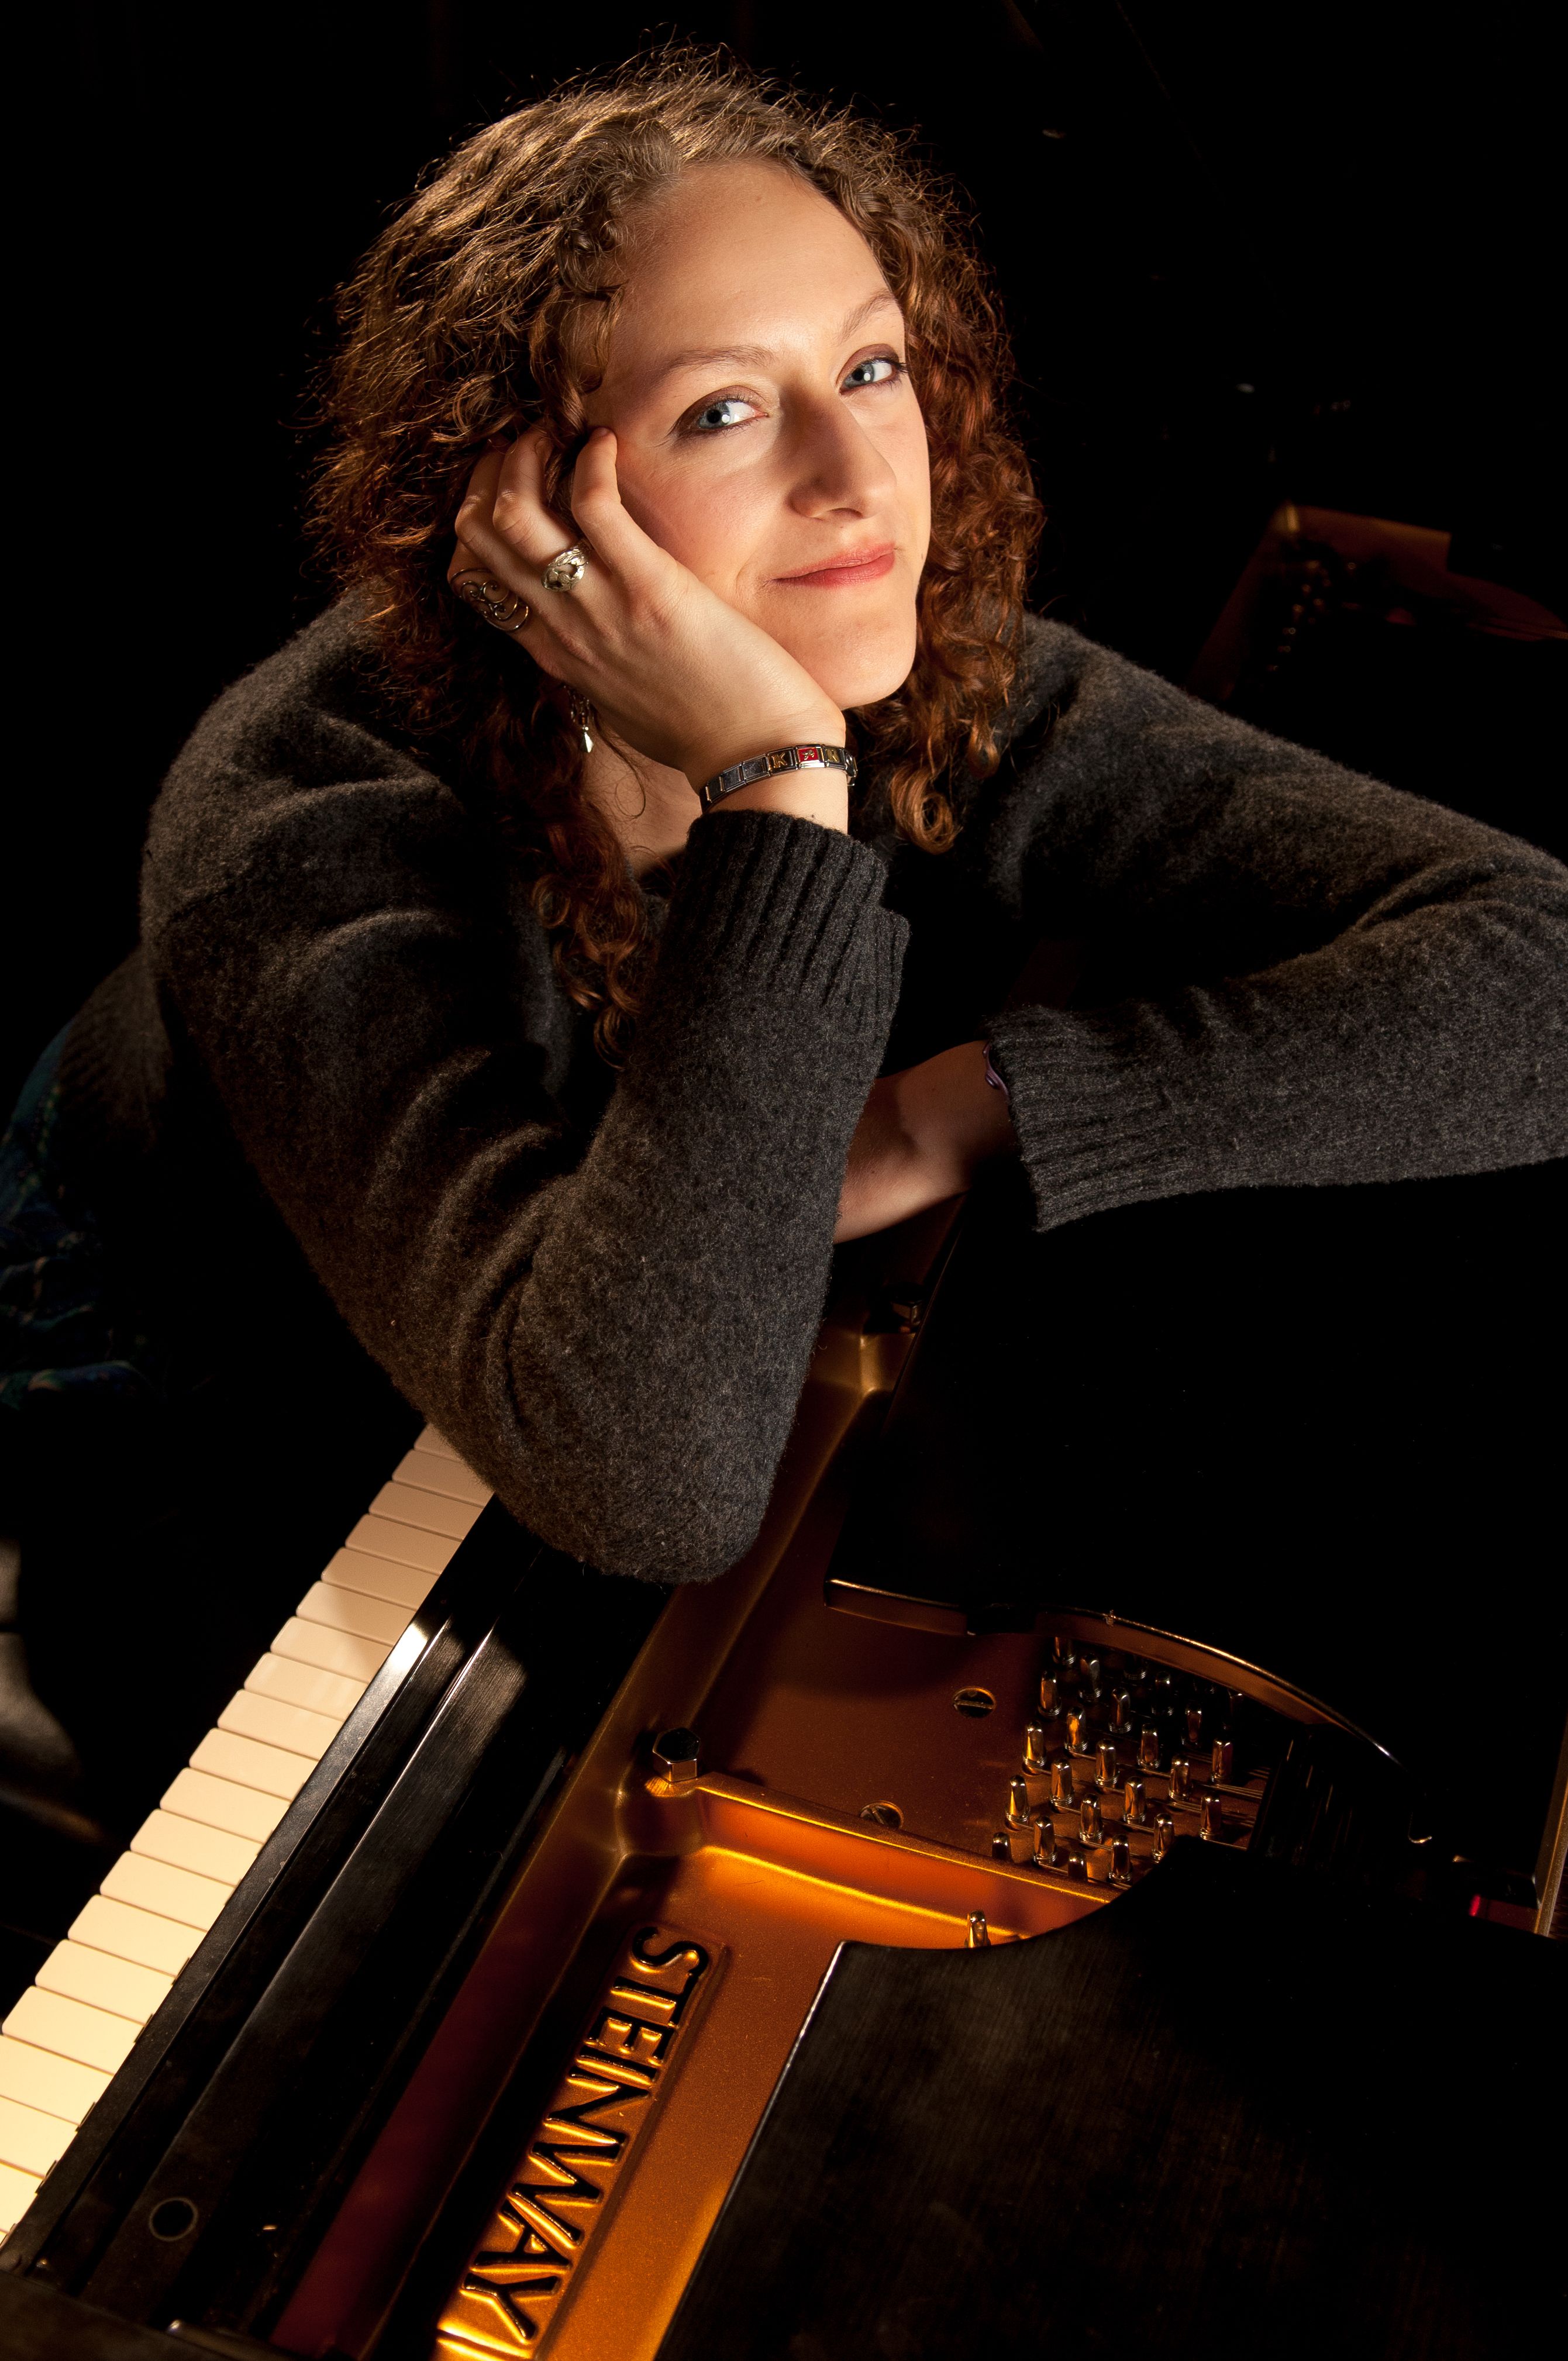 Portrait of young female pianist with Steinway piano